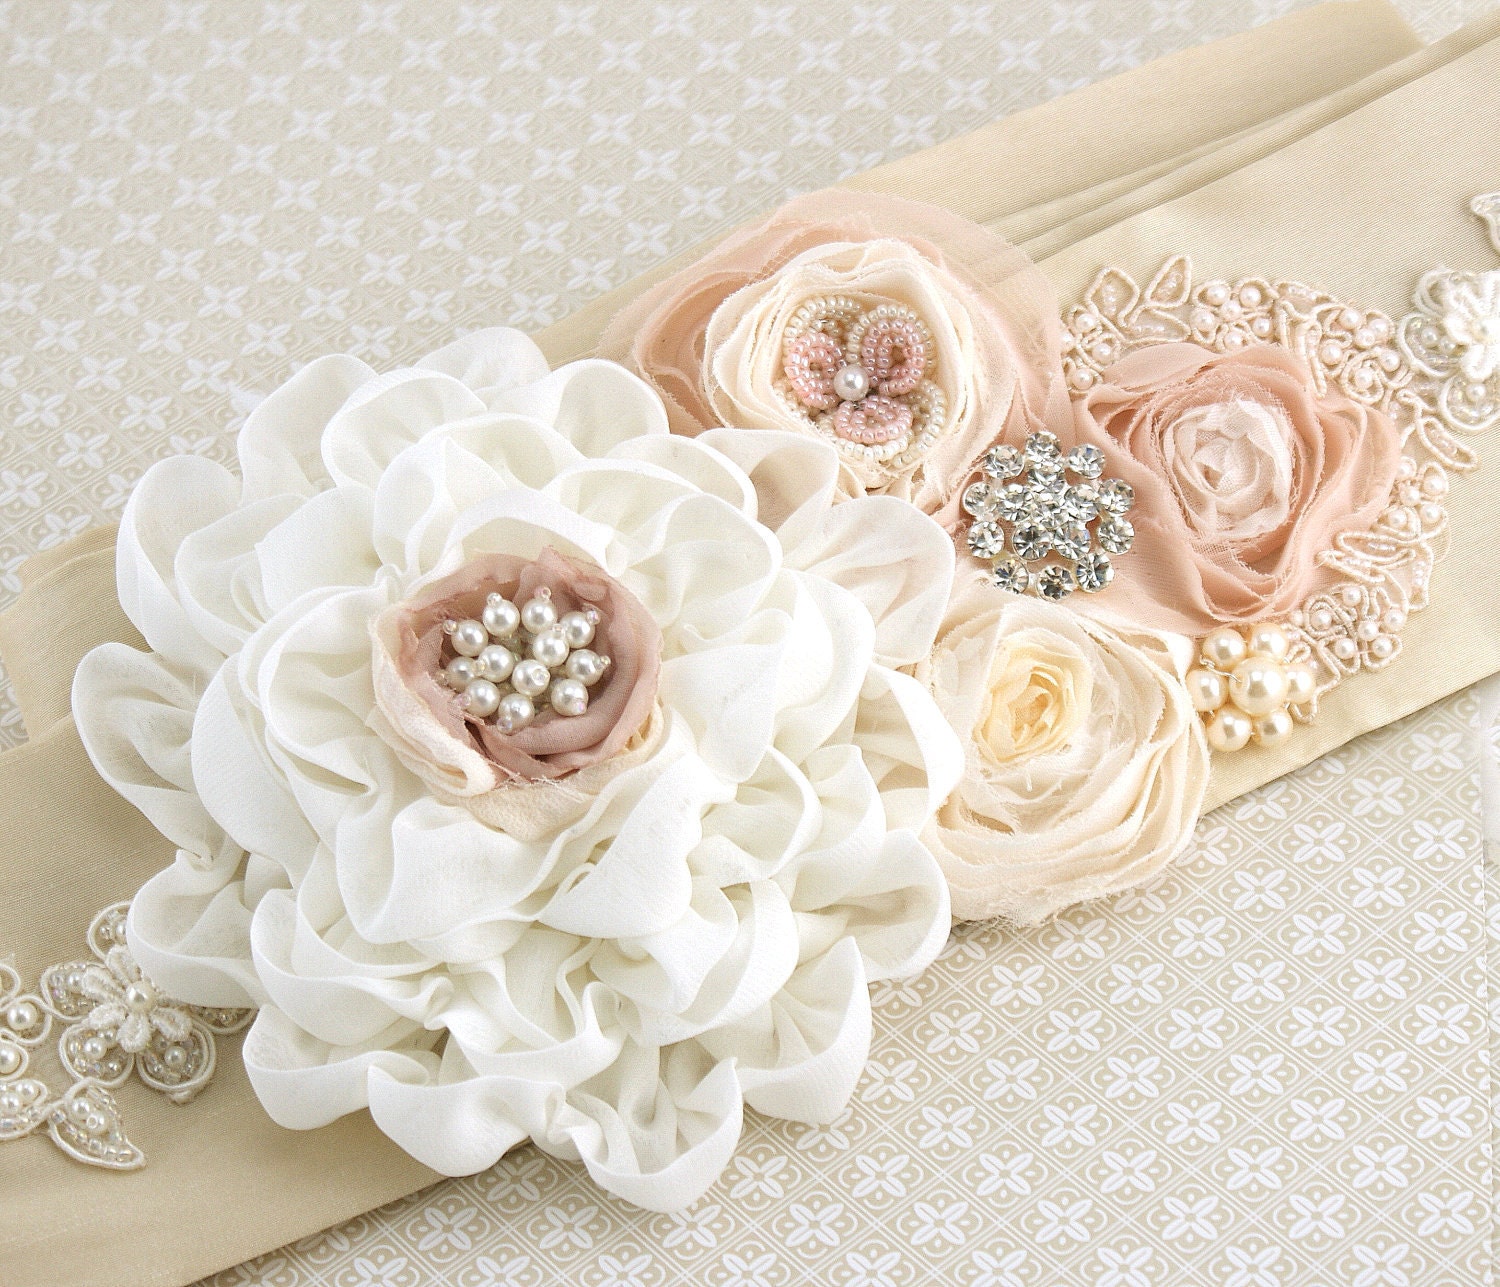 Bridal Sash in Ivory, Champagne, Cream and Blush Pink with Chiffon, Dupioni Silk, Pearls and Jewels- Pearl Dream